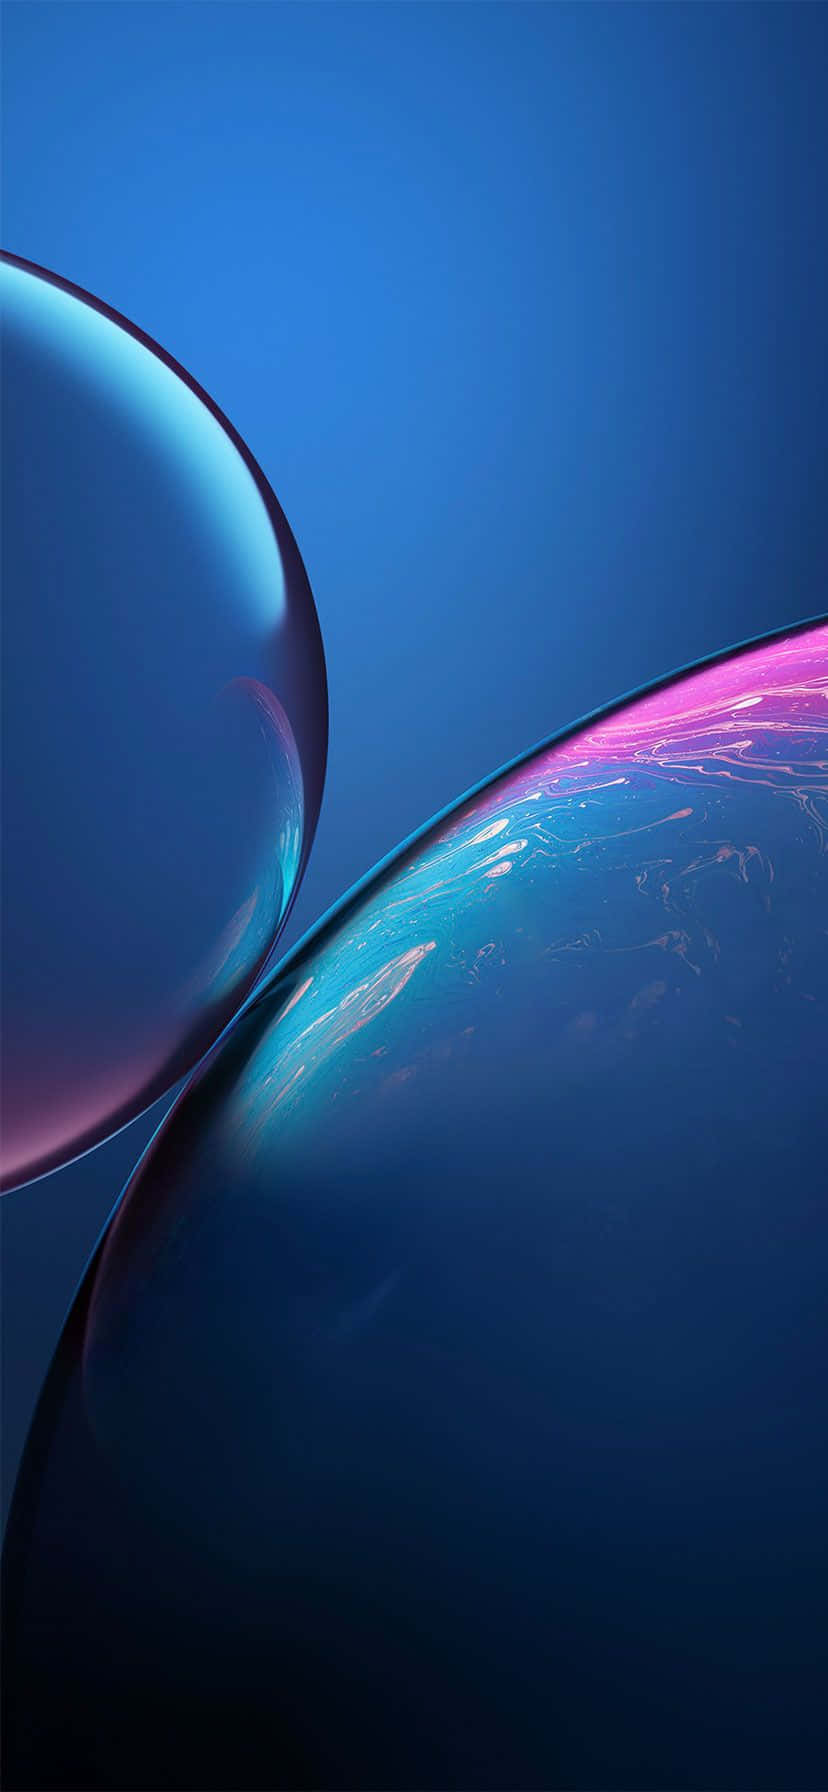 Iphonexr Stock Blue Abstract Bubbles - Iphone Xr Stock Bolle Astratte Blu Sfondo